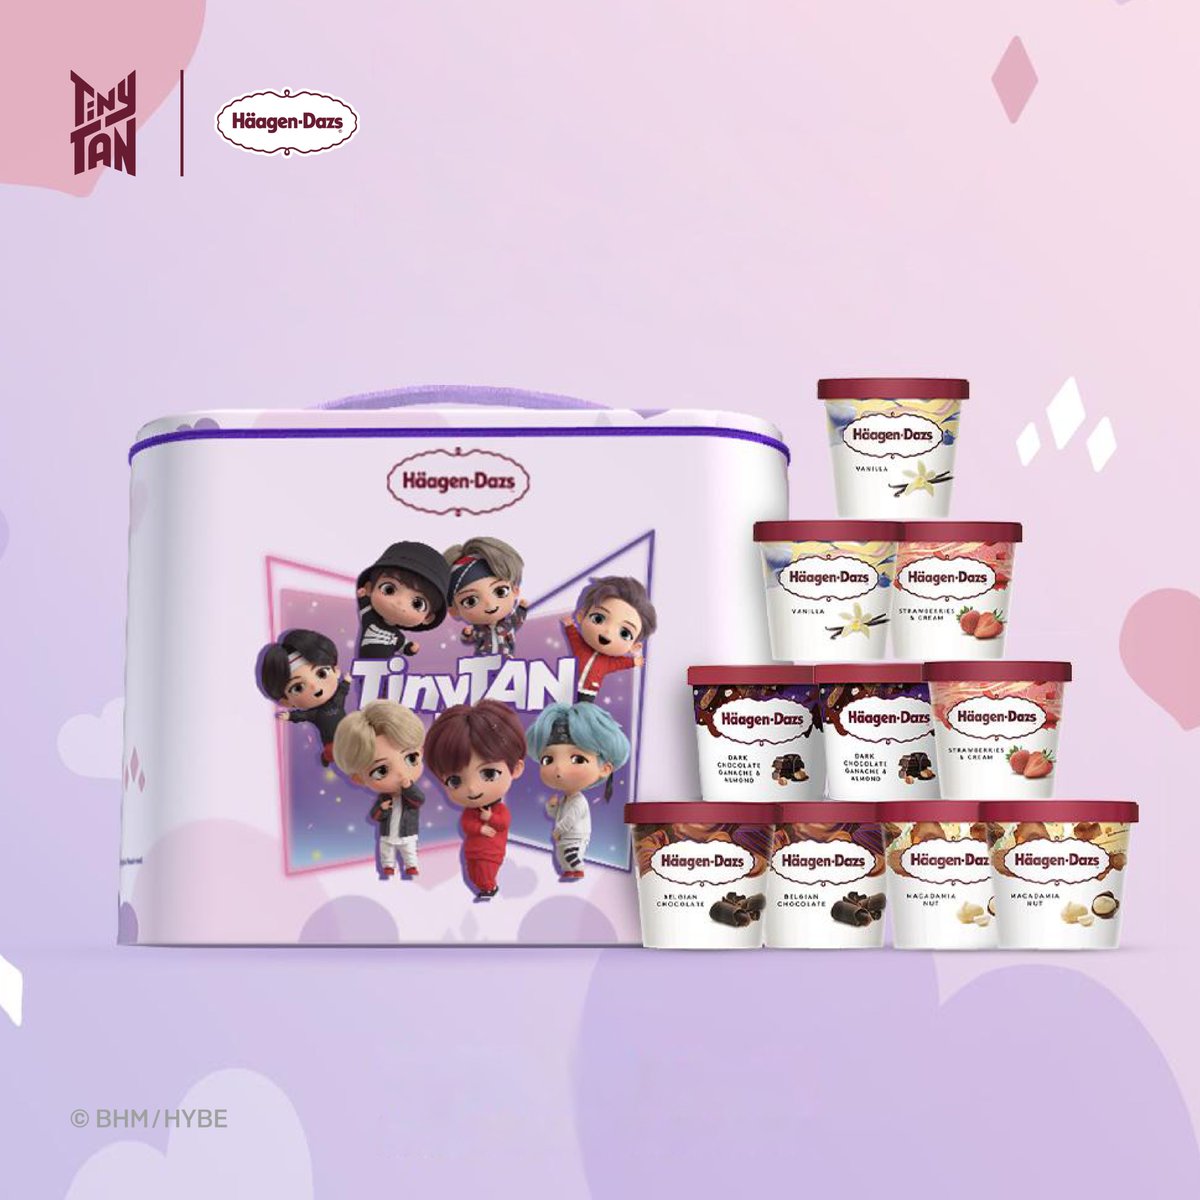 [April 2021] Newly Launched Licensed Products!TinyTAN | Häagen-Dazs Minicup Party Pack available in Malaysia